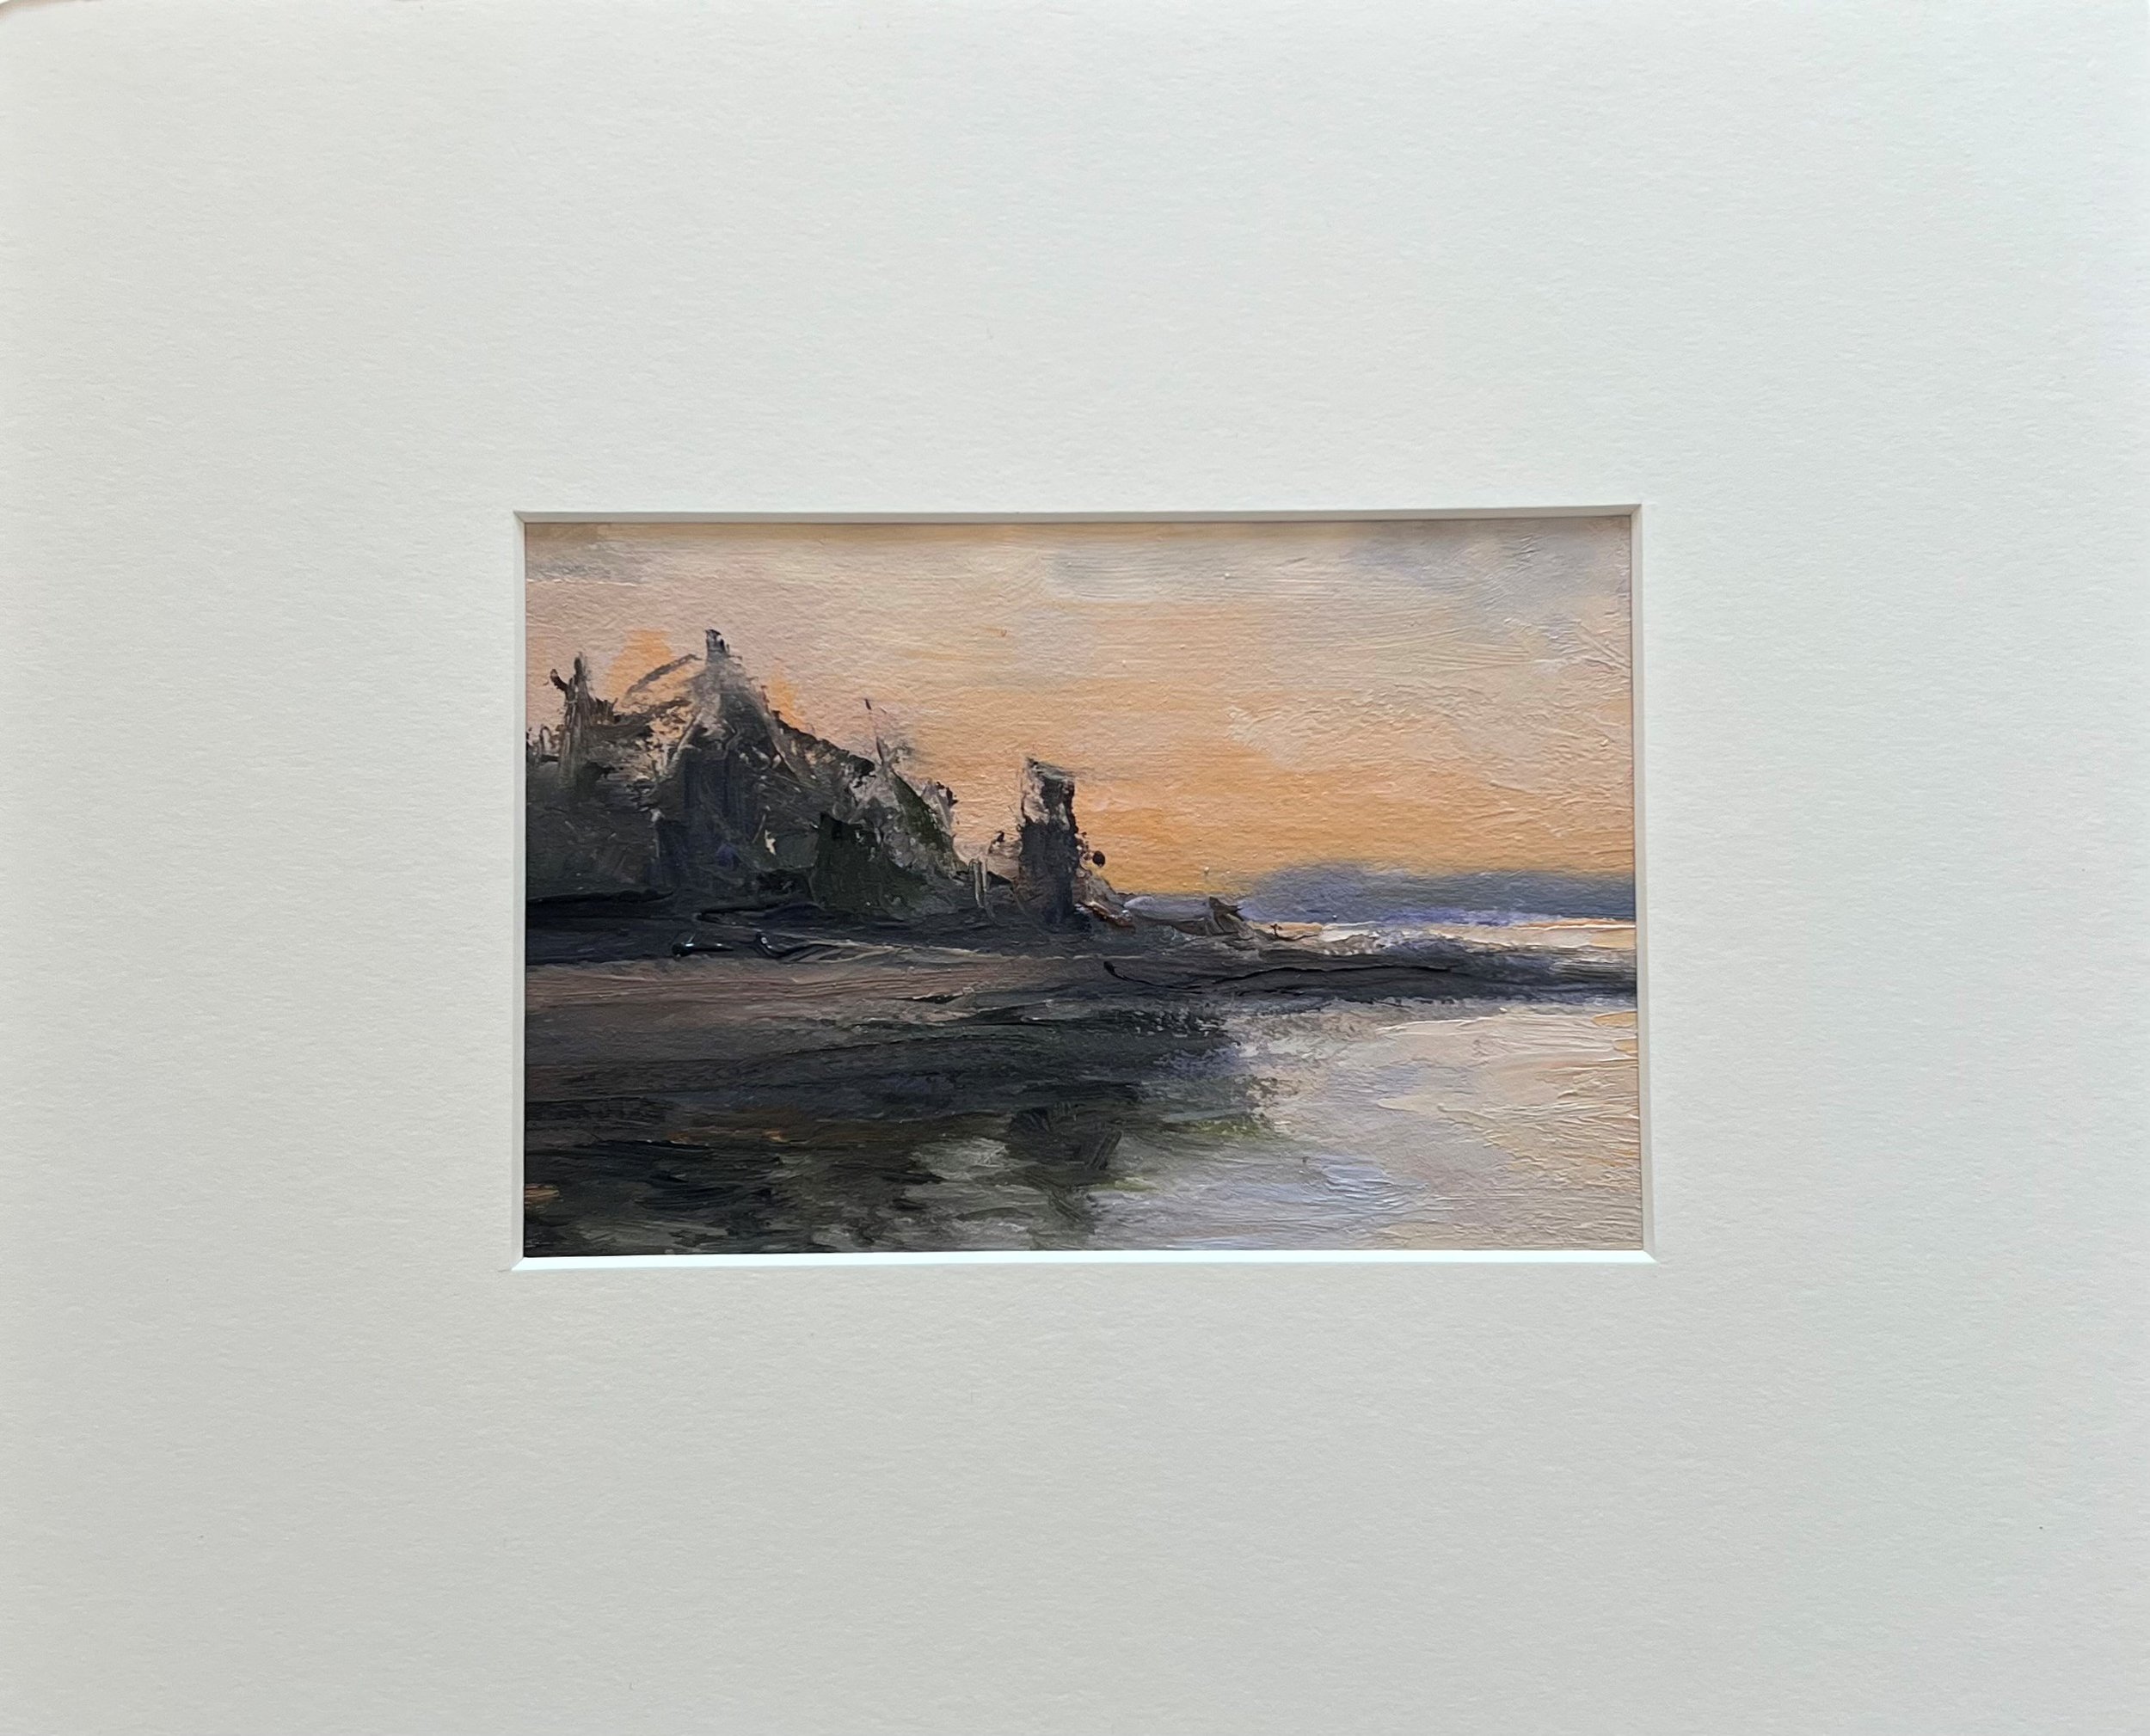 2022-05 Joshua Point Sunset    Oil on Gesso Paper  12x14 inch mat   Window cut to 5x7 inches  Guilford, CT  .jpg